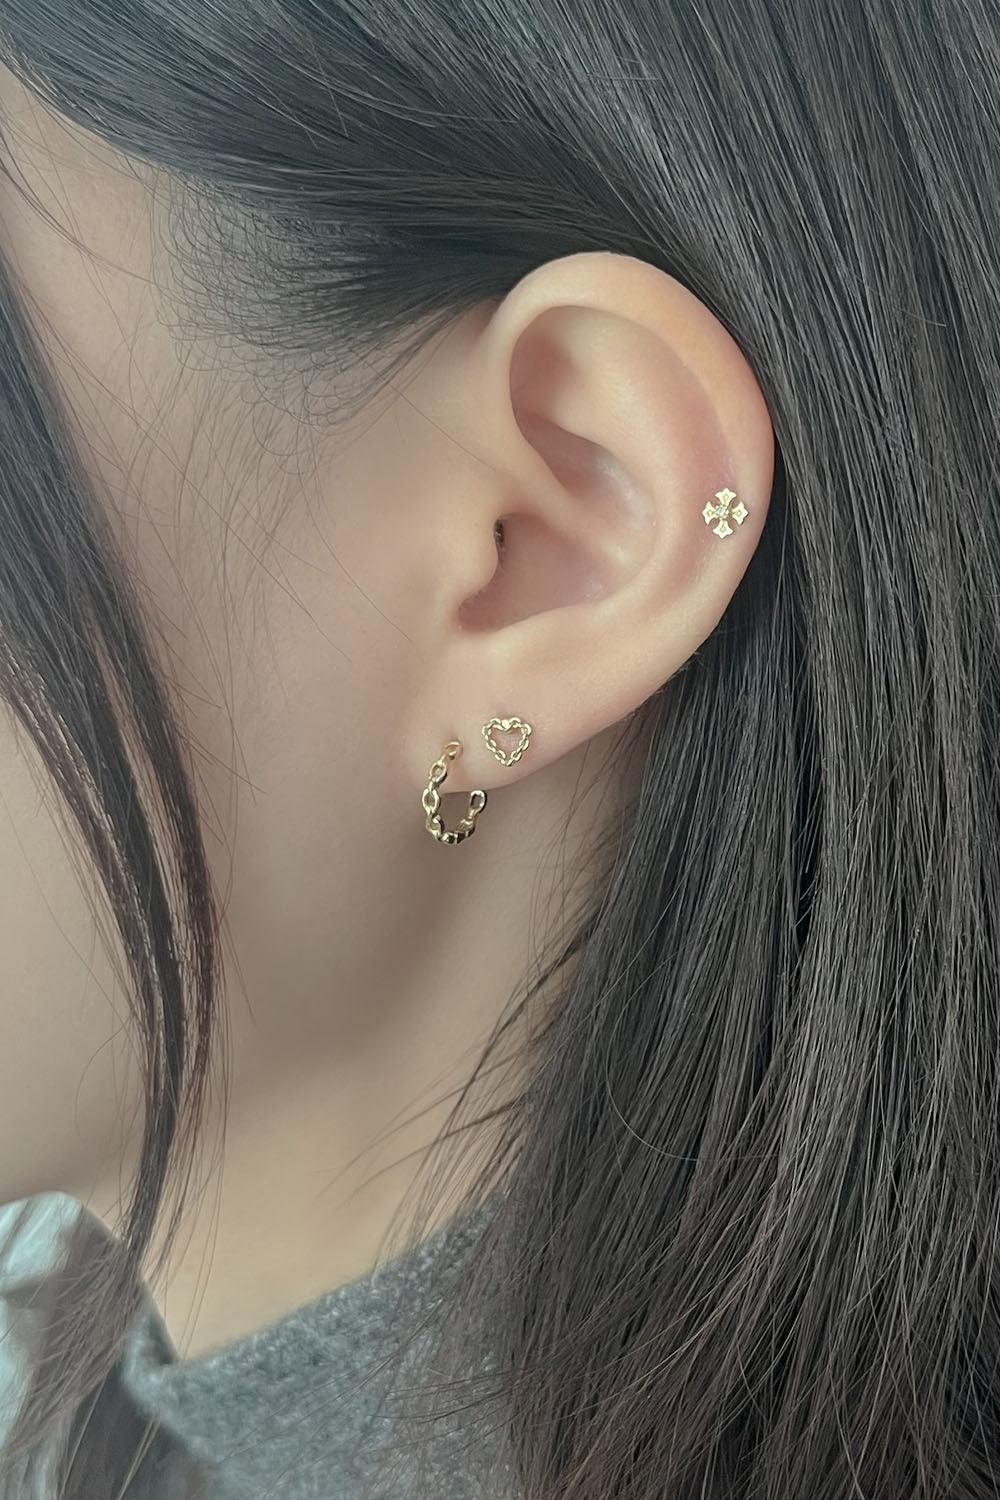 14k chain one touch earring - 4MiLi (フォーミリ)